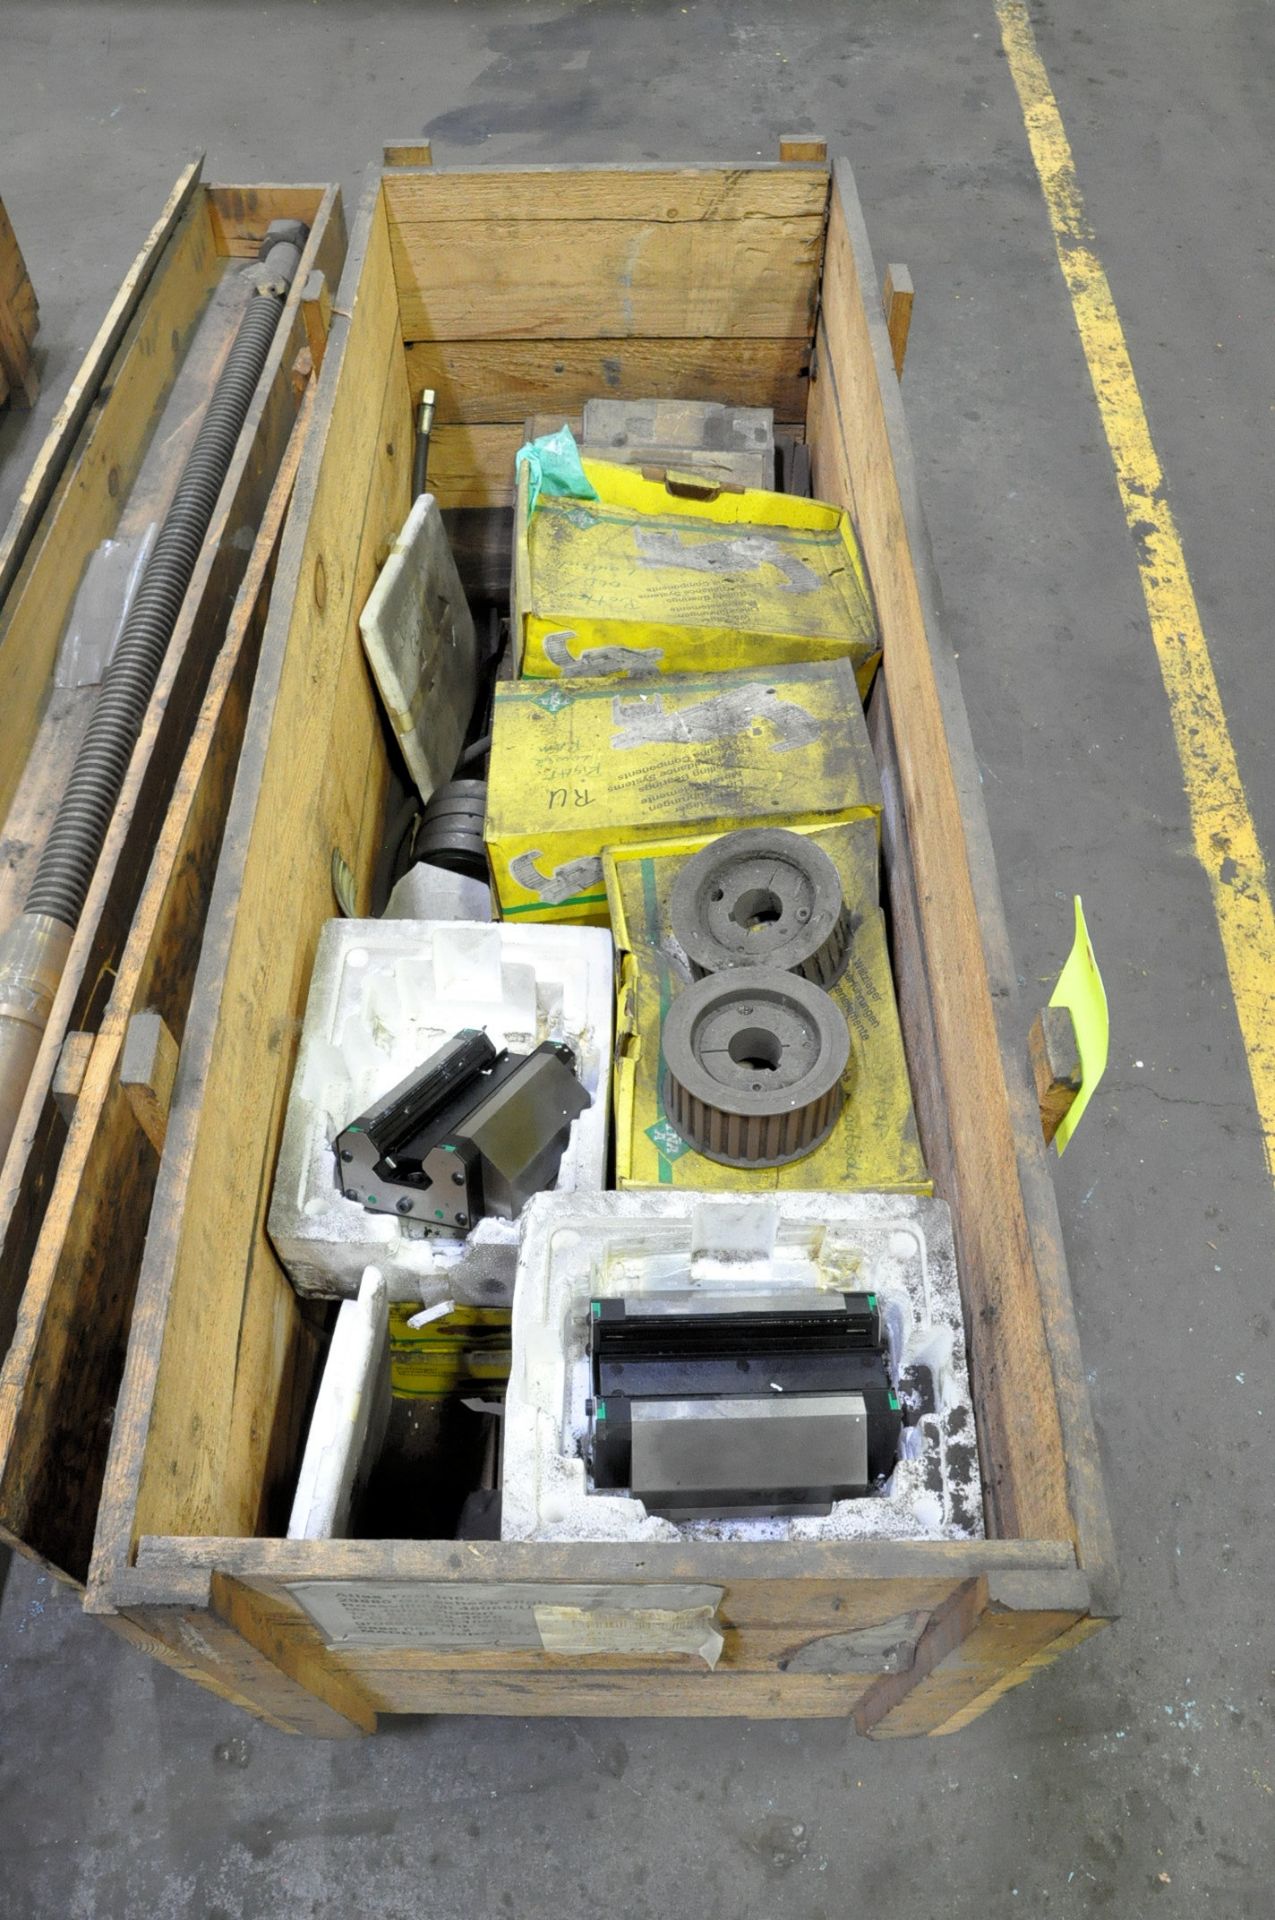 Lot-Asst'd Tooling in (1) Crate, (D-17), (Yellow Tag) - Image 2 of 2